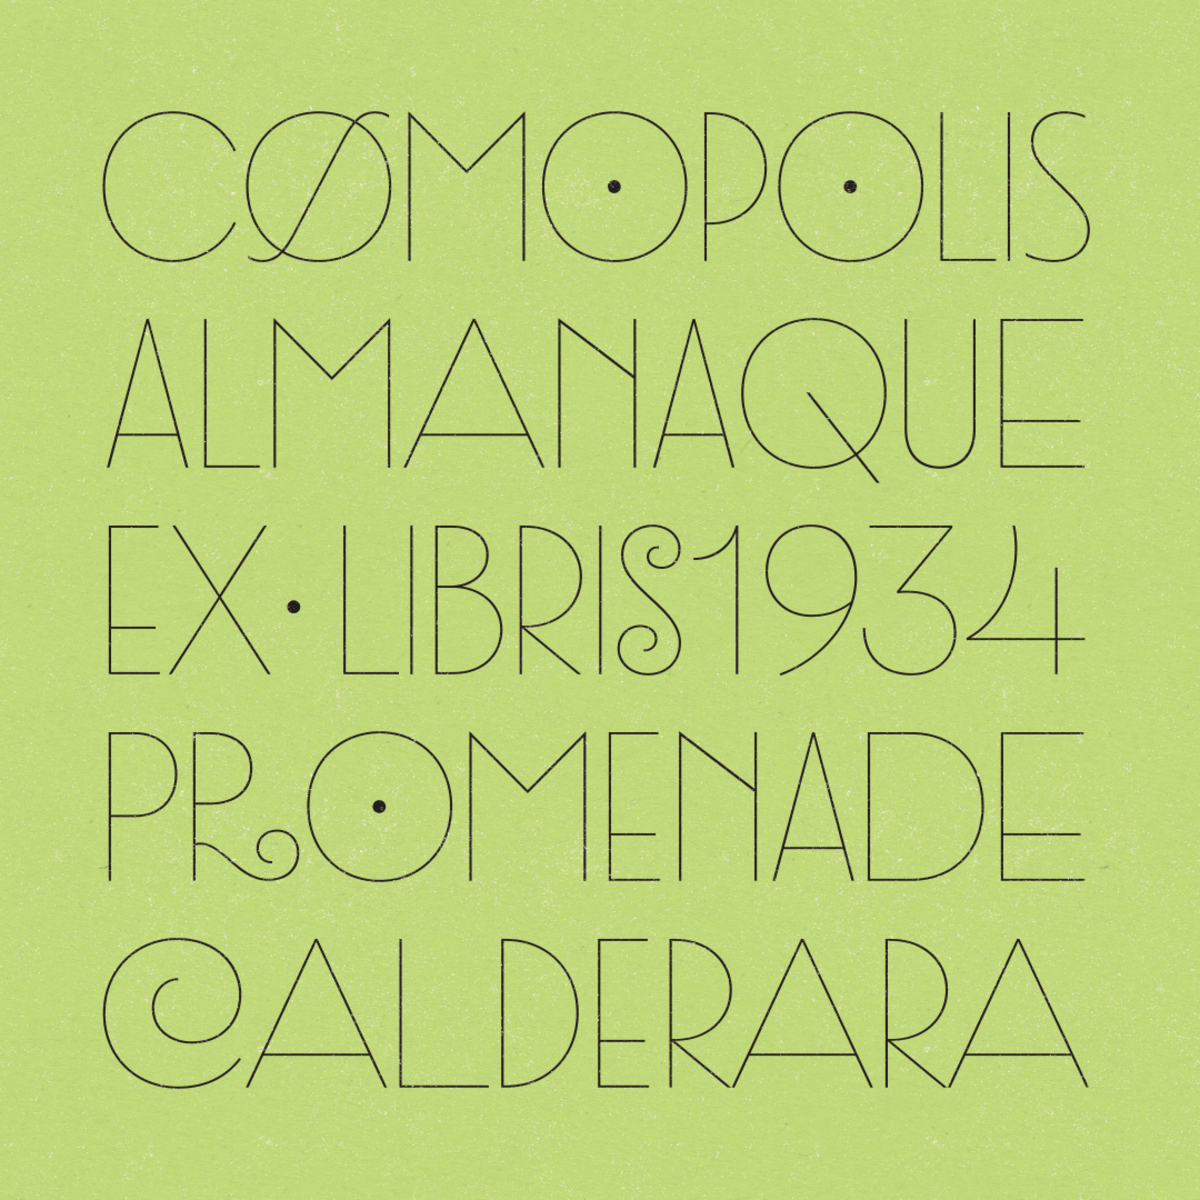 🌀UPDATE🌀Melindrosa by @flaviazim is growing! This Art Deco display, referencing the lettering work of Brazilian master J. Carlos, now has 4 optical sizes, more language support, and design refinements. More ligatures and swashes are in its future! futurefonts.xyz/flaviazim/meli…